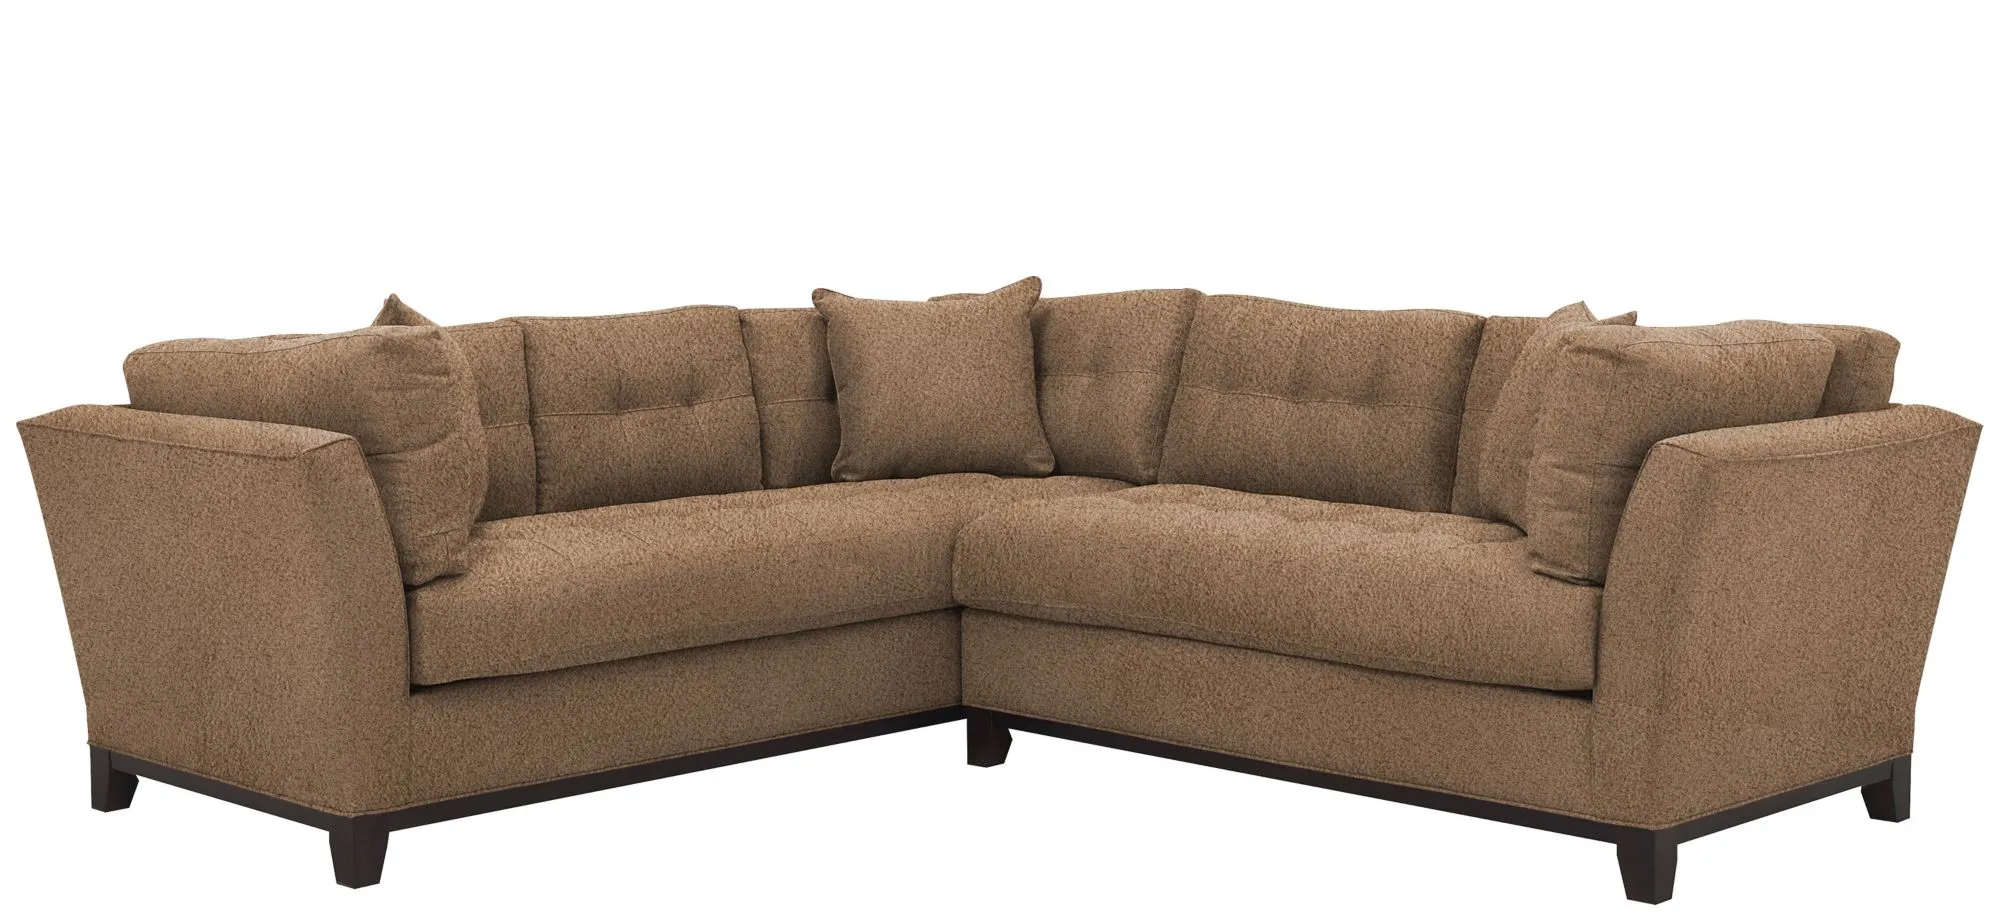 Cityscape 2-pc. Sectional in Suede So Soft Khaki by H.M. Richards